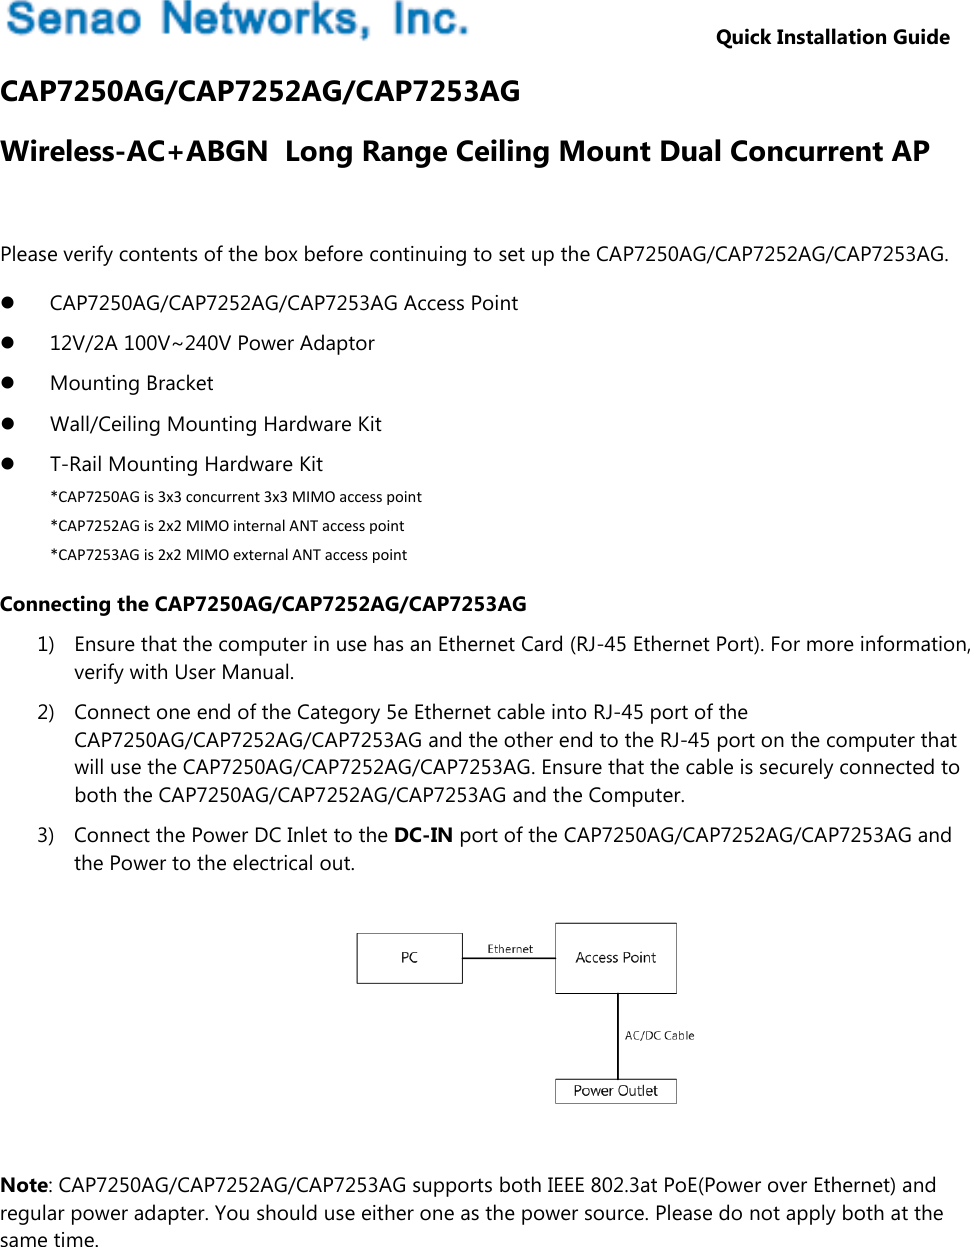                         Quick Installation Guide CAP7250AG/CAP7252AG/CAP7253AG Wireless-AC+ABGN  Long Range Ceiling Mount Dual Concurrent AP  Please verify contents of the box before continuing to set up the CAP7250AG/CAP7252AG/CAP7253AG.  CAP7250AG/CAP7252AG/CAP7253AG Access Point  12V/2A 100V~240V Power Adaptor  Mounting Bracket  Wall/Ceiling Mounting Hardware Kit  T-Rail Mounting Hardware Kit *CAP7250AG is 3x3 concurrent 3x3 MIMO access point *CAP7252AG is 2x2 MIMO internal ANT access point *CAP7253AG is 2x2 MIMO external ANT access point Connecting the CAP7250AG/CAP7252AG/CAP7253AG 1) Ensure that the computer in use has an Ethernet Card (RJ-45 Ethernet Port). For more information, verify with User Manual. 2) Connect one end of the Category 5e Ethernet cable into RJ-45 port of the CAP7250AG/CAP7252AG/CAP7253AG and the other end to the RJ-45 port on the computer that will use the CAP7250AG/CAP7252AG/CAP7253AG. Ensure that the cable is securely connected to both the CAP7250AG/CAP7252AG/CAP7253AG and the Computer. 3) Connect the Power DC Inlet to the DC-IN port of the CAP7250AG/CAP7252AG/CAP7253AG and the Power to the electrical out.        Note: CAP7250AG/CAP7252AG/CAP7253AG supports both IEEE 802.3at PoE(Power over Ethernet) and regular power adapter. You should use either one as the power source. Please do not apply both at the same time.   